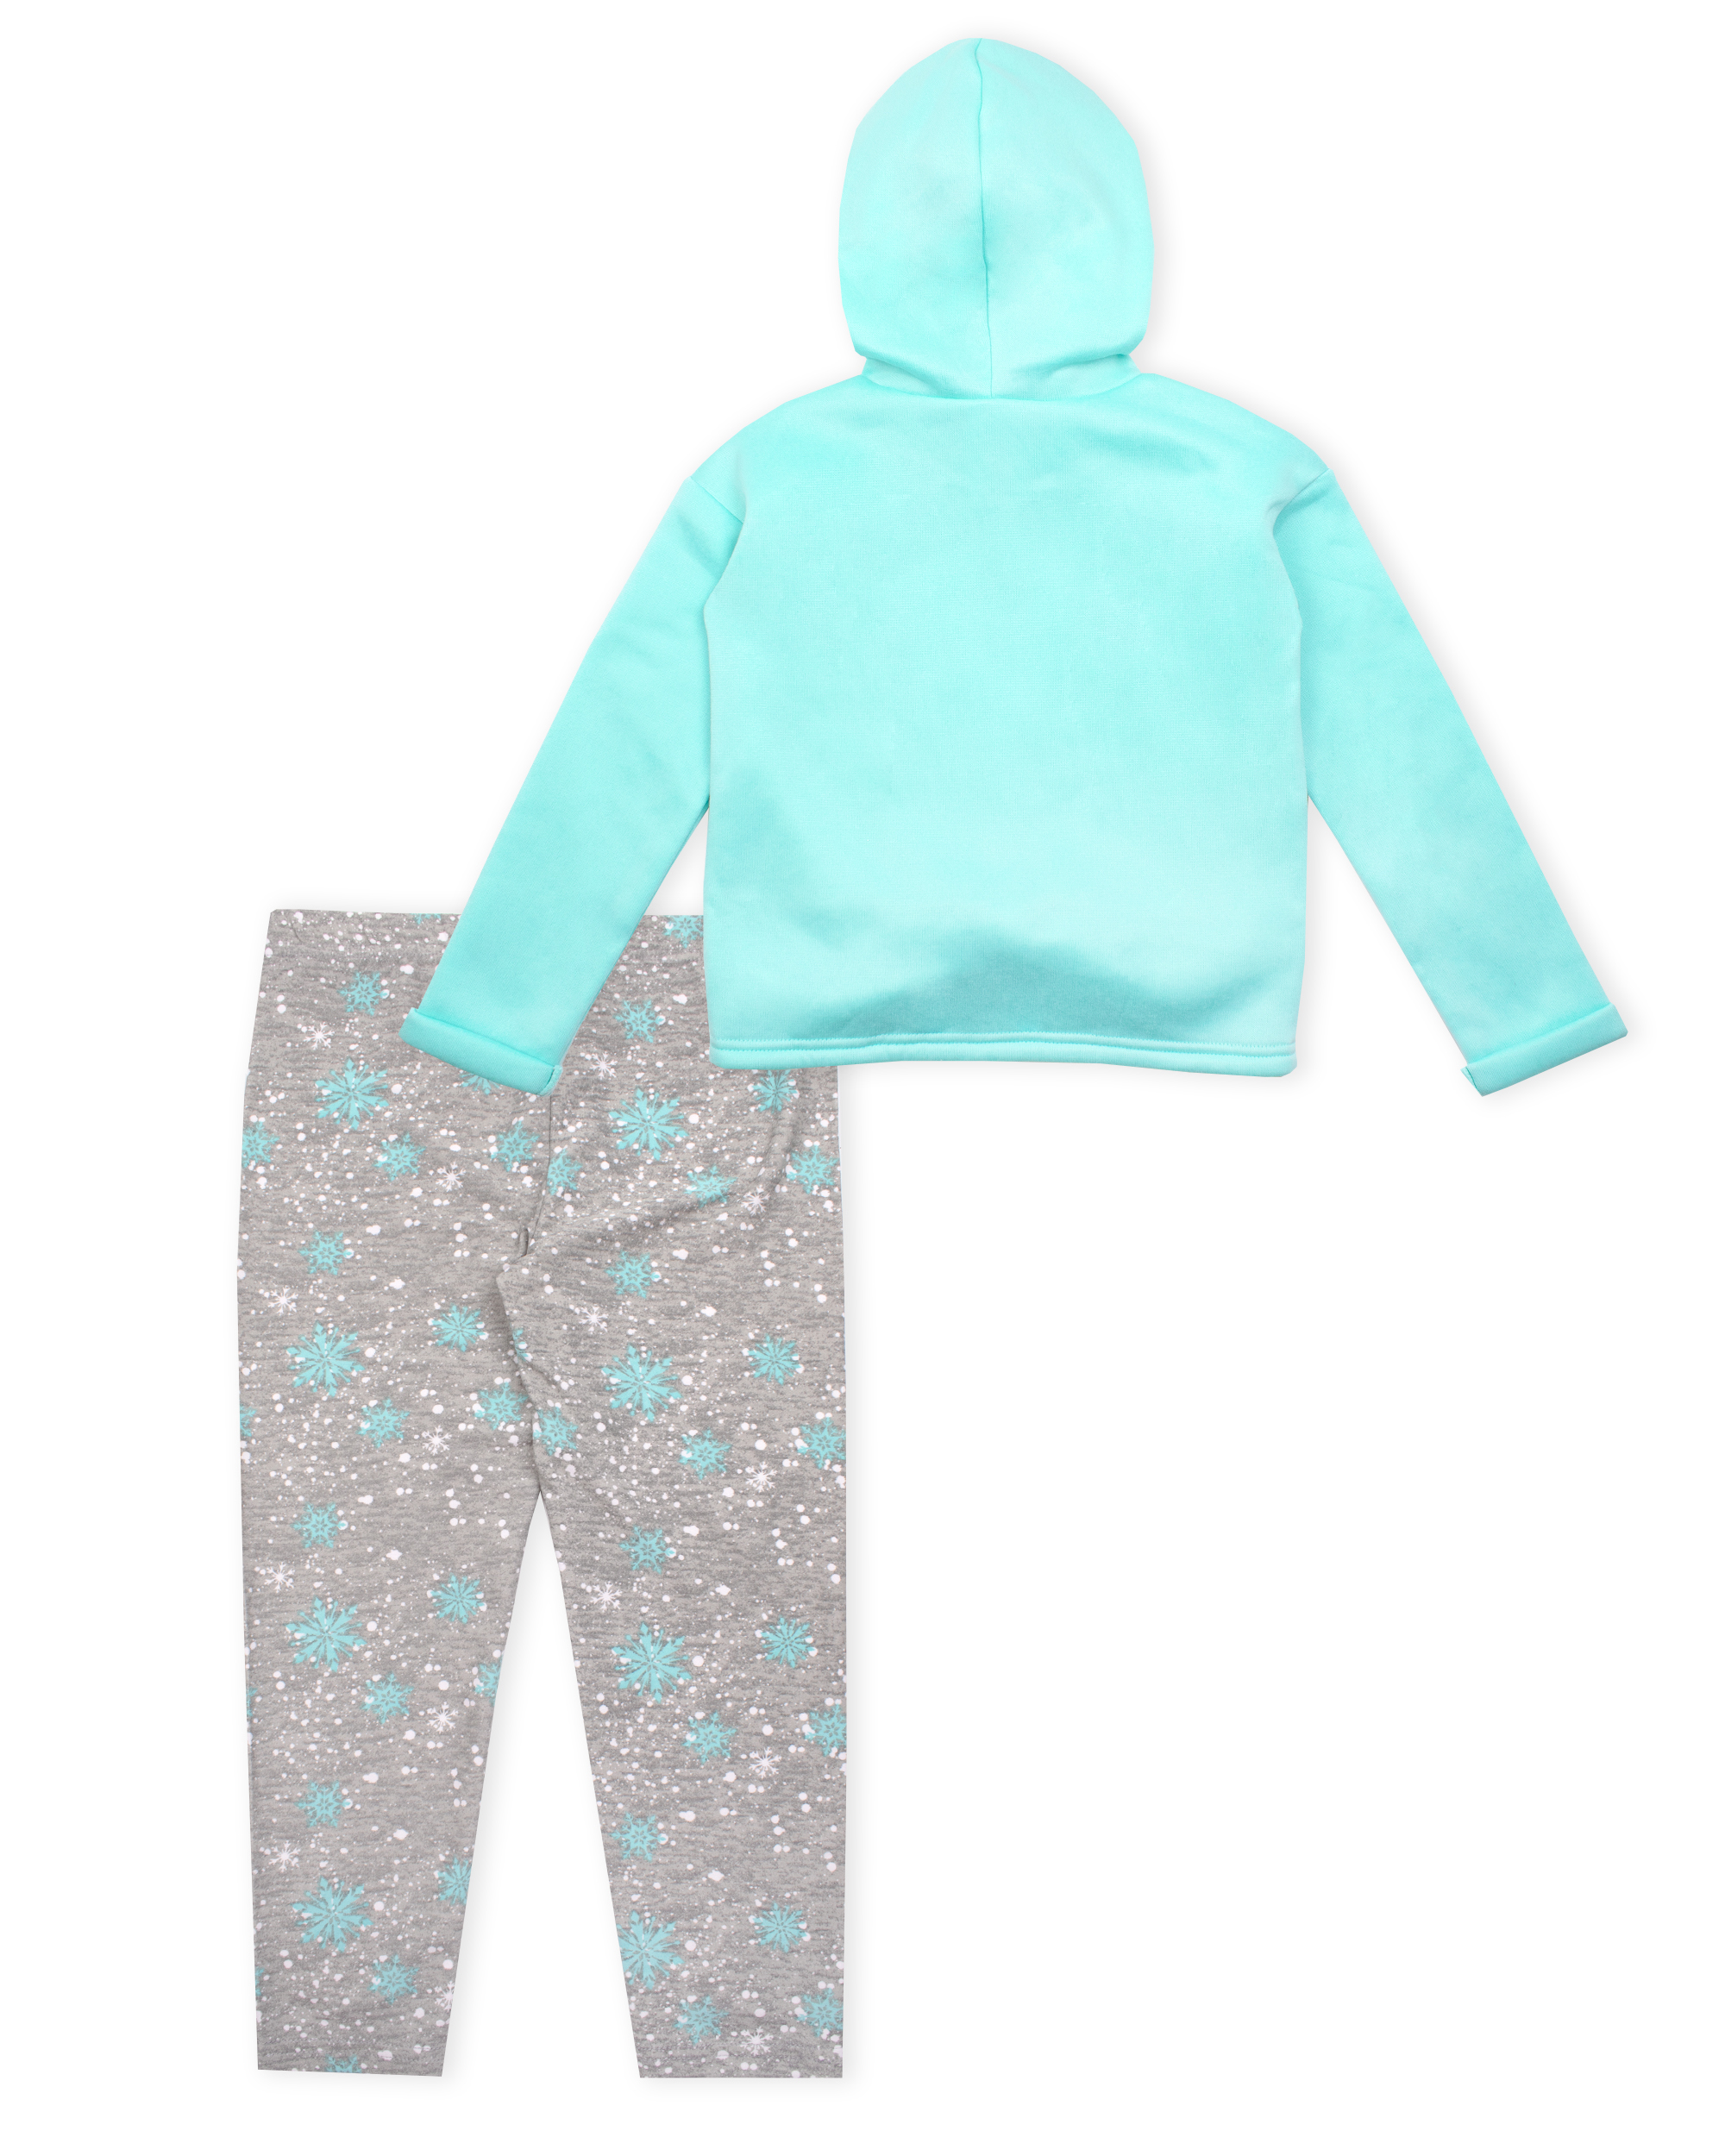 Disney Frozen 2 Anna & Elsa Toddler Girl Tie-Front Hoodie & Printed Leggings, 2pc Outfit Set - image 3 of 3